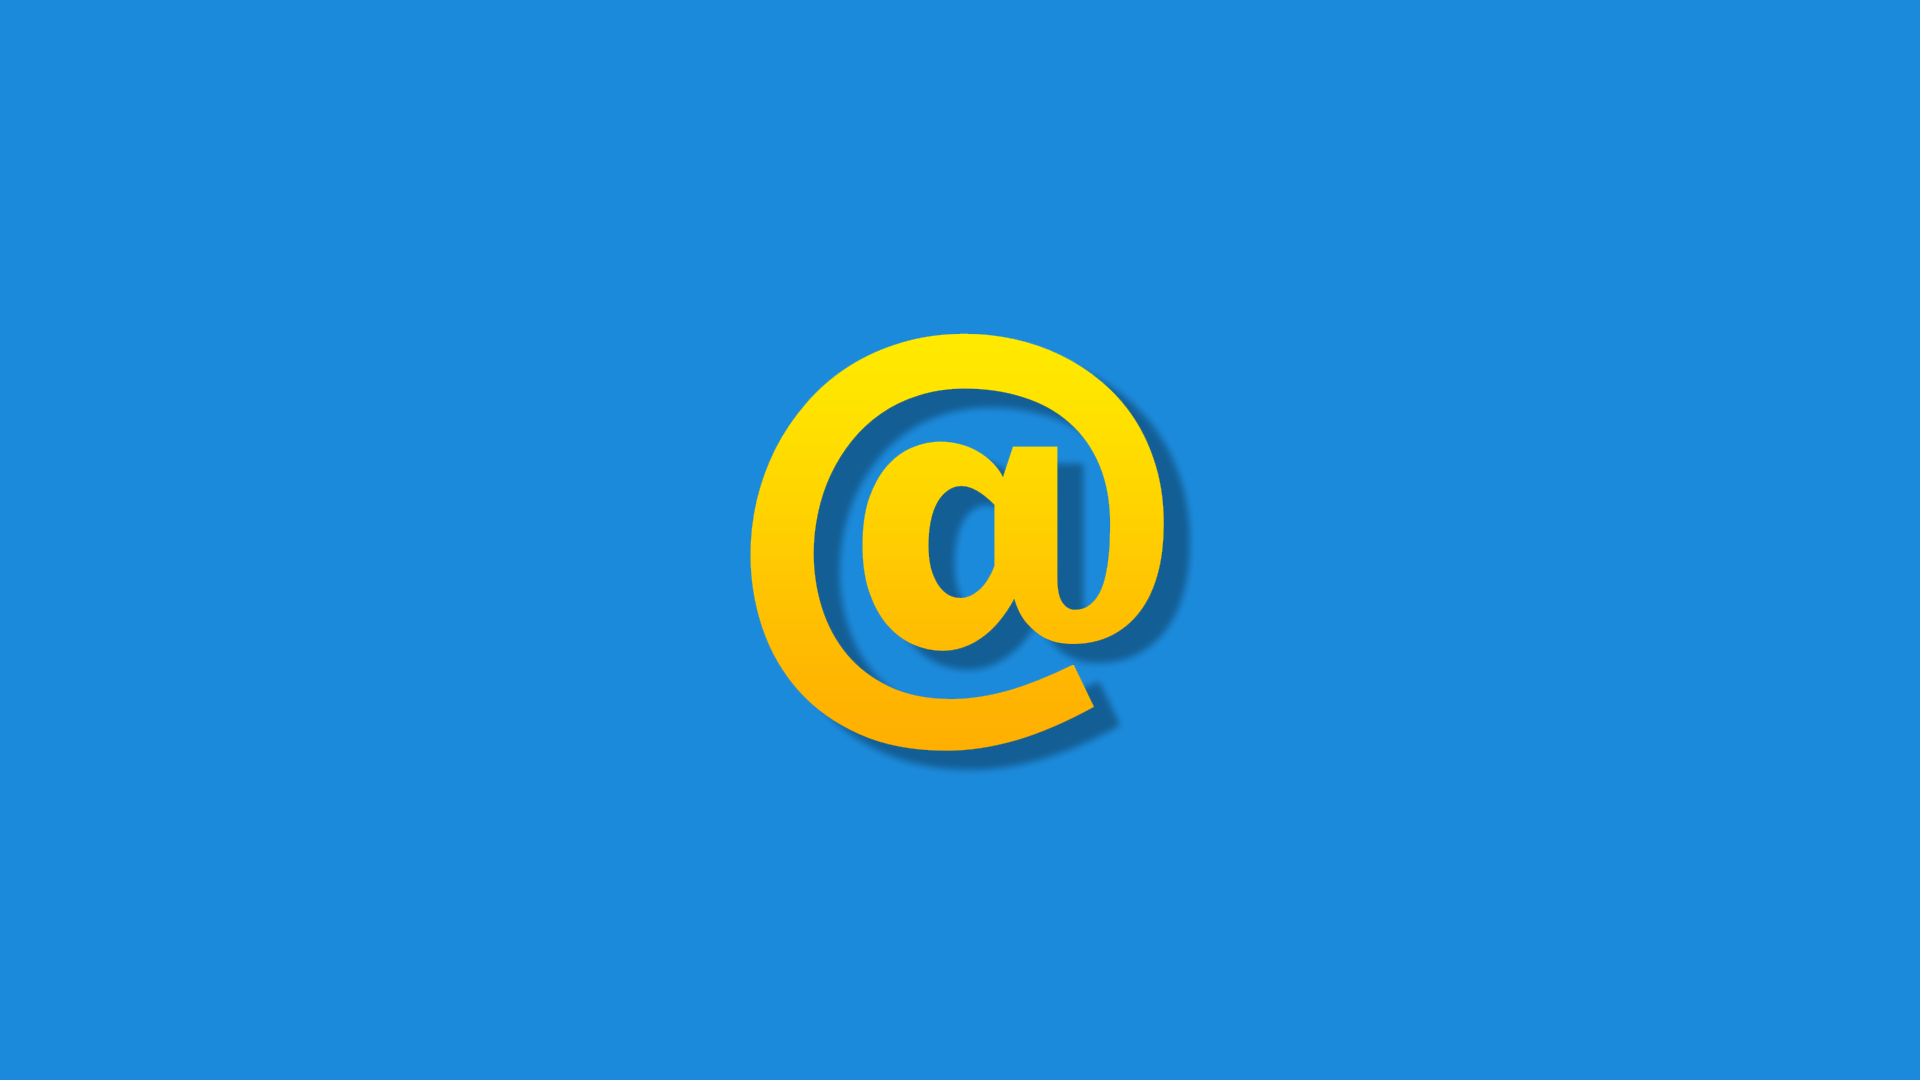 A blue background with an @ symbol in gold text